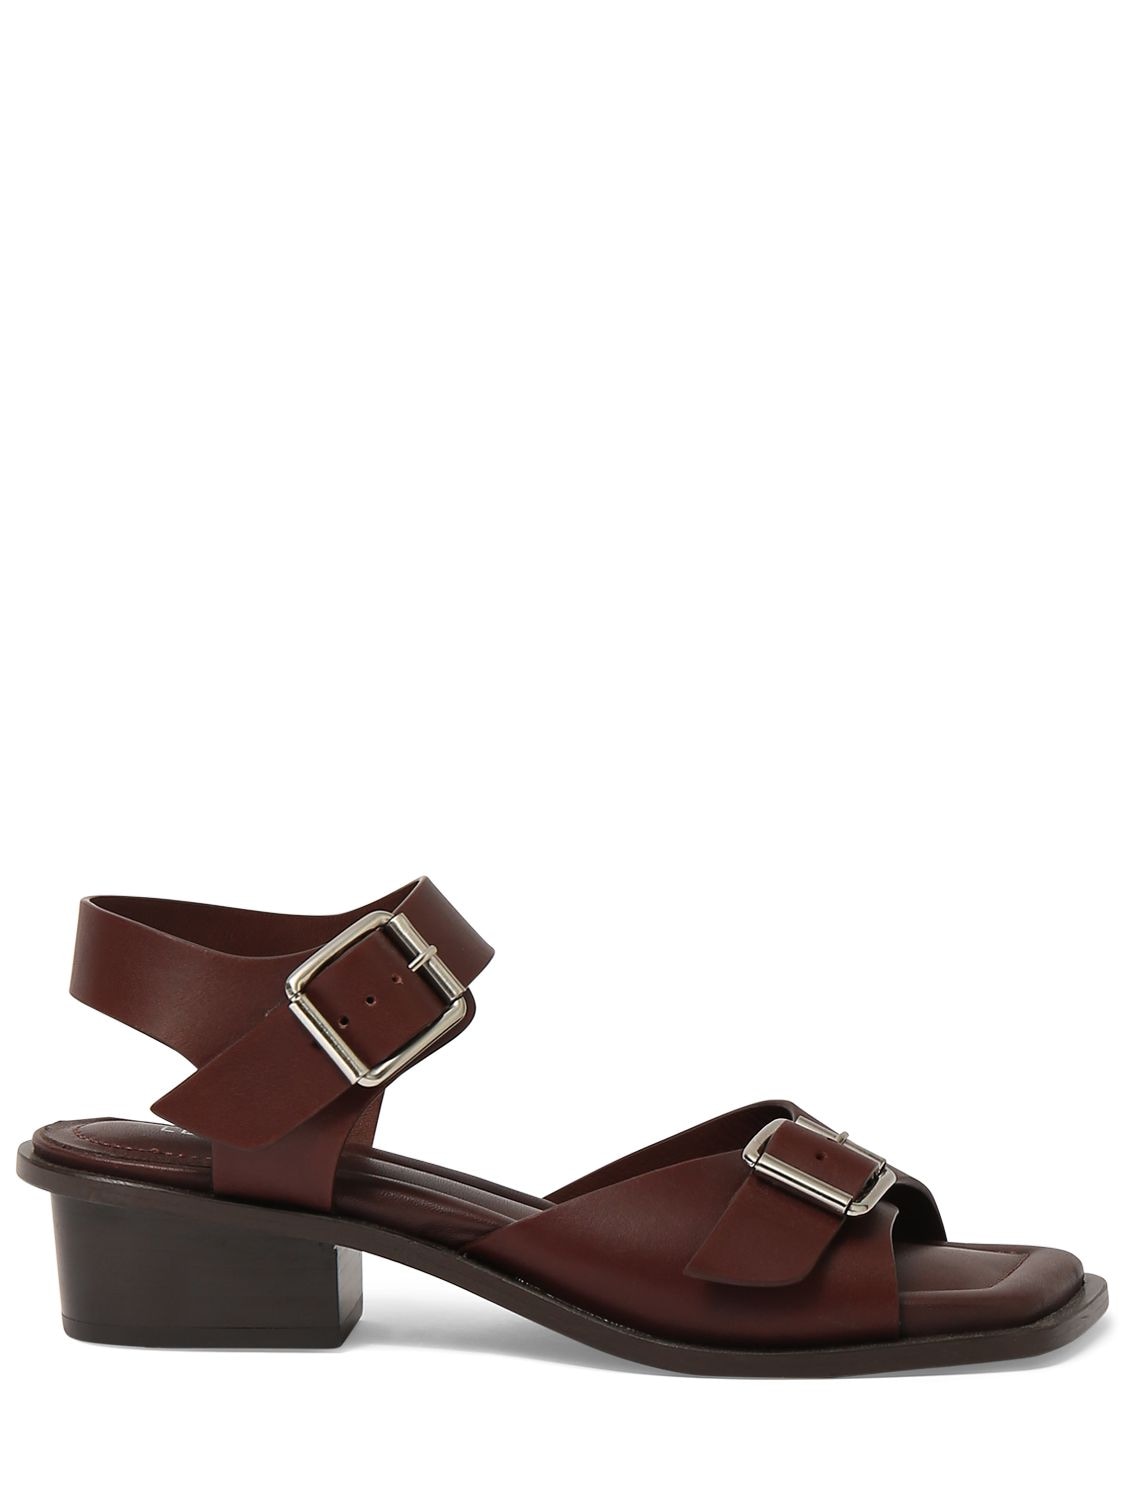 Image of 35mm Square Heeled Sandals W/ Straps